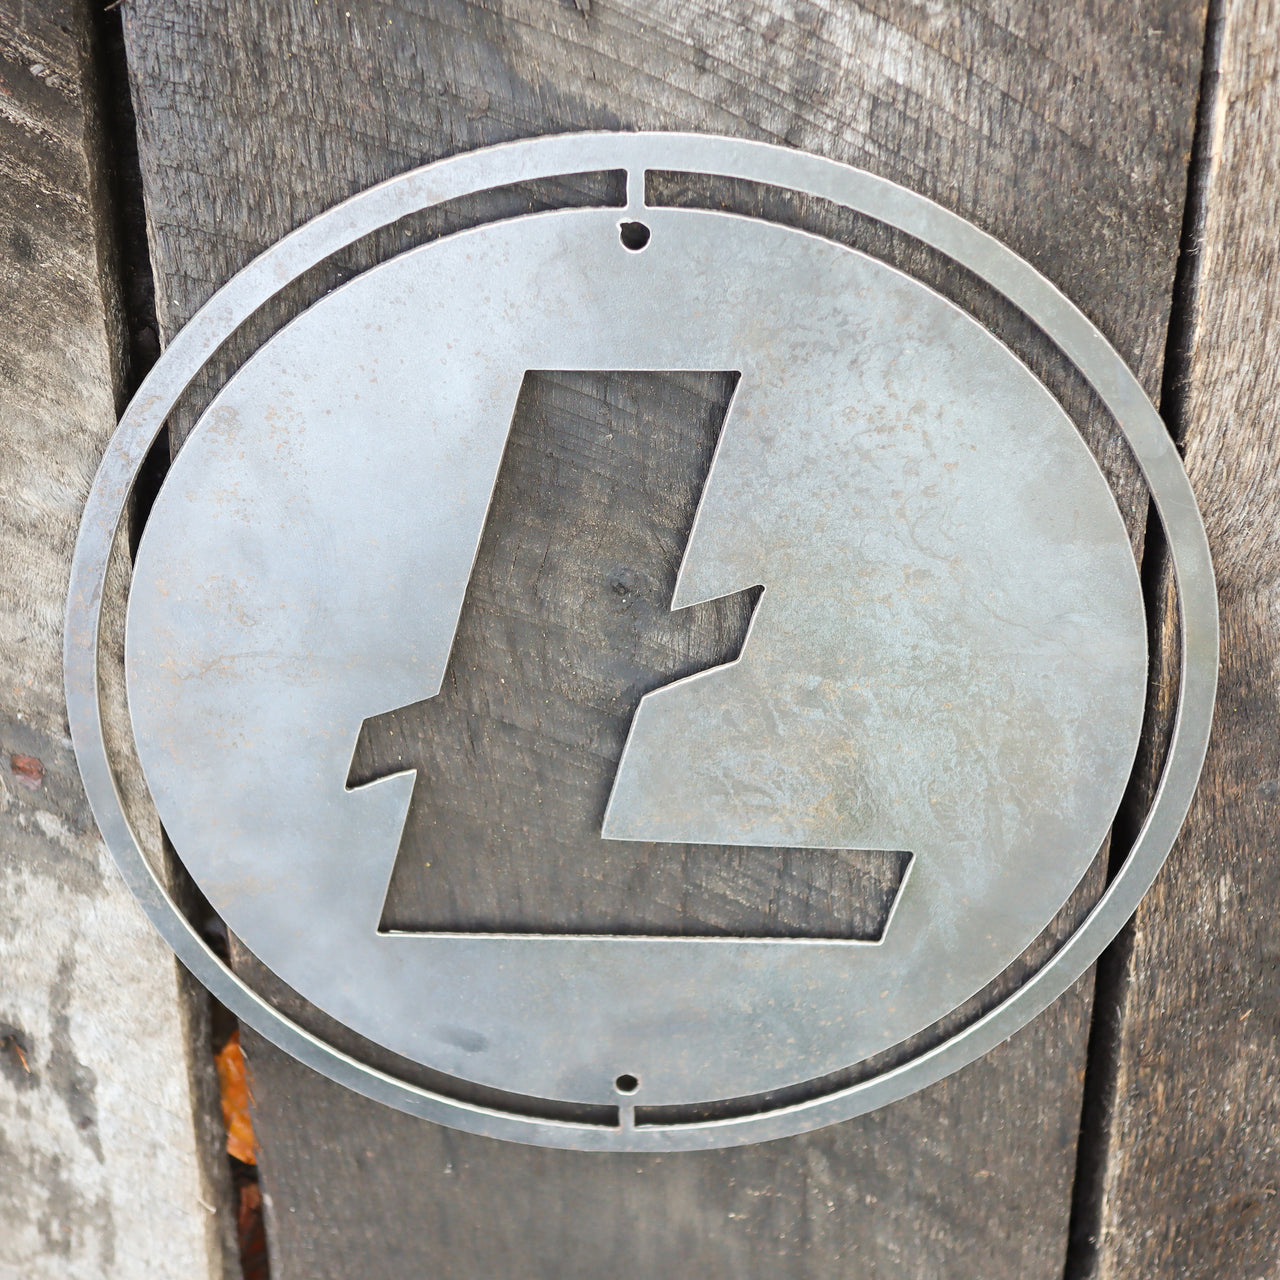 Metal Litecoin Shop Sign - Steel Cryptocurrency Business Decor - Custom Size Crypto Bitcoin Altcoin